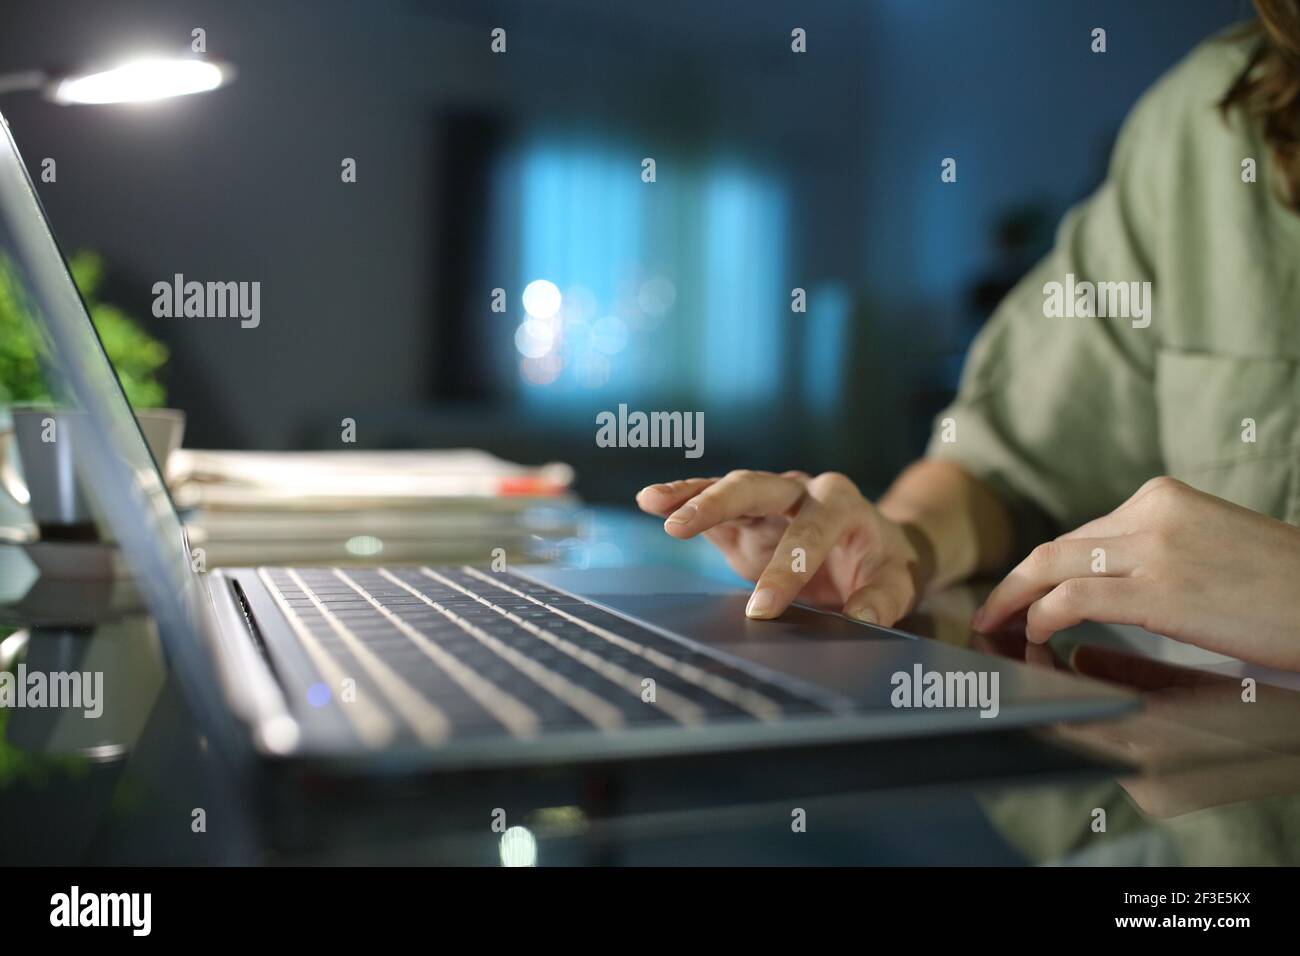 Close up of a woman hand browsing on laptop using touchpad in the night at home Stock Photo